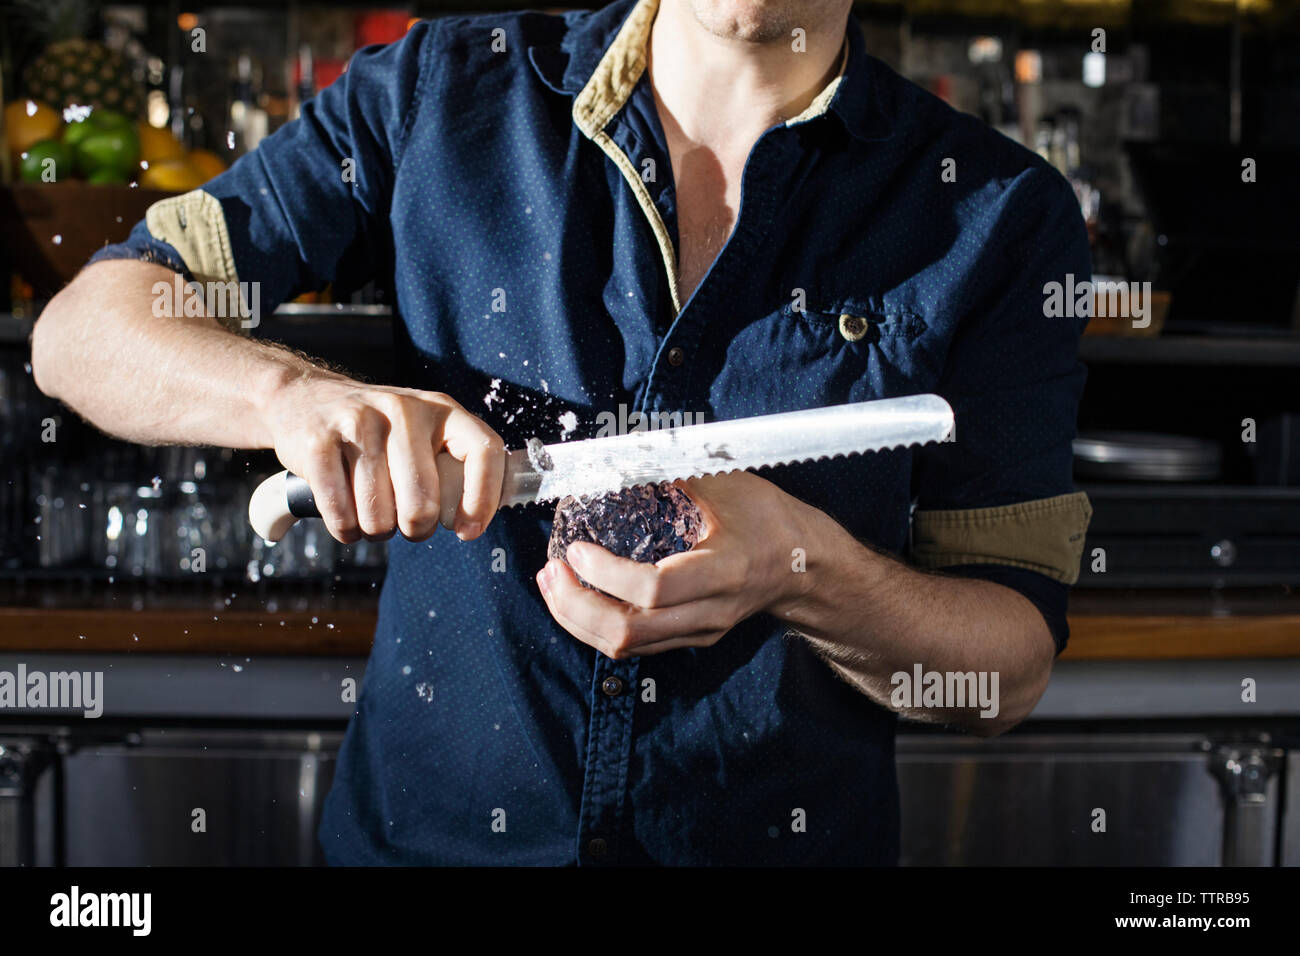 Midsection of chef cutting ice block in kitchen Stock Photo